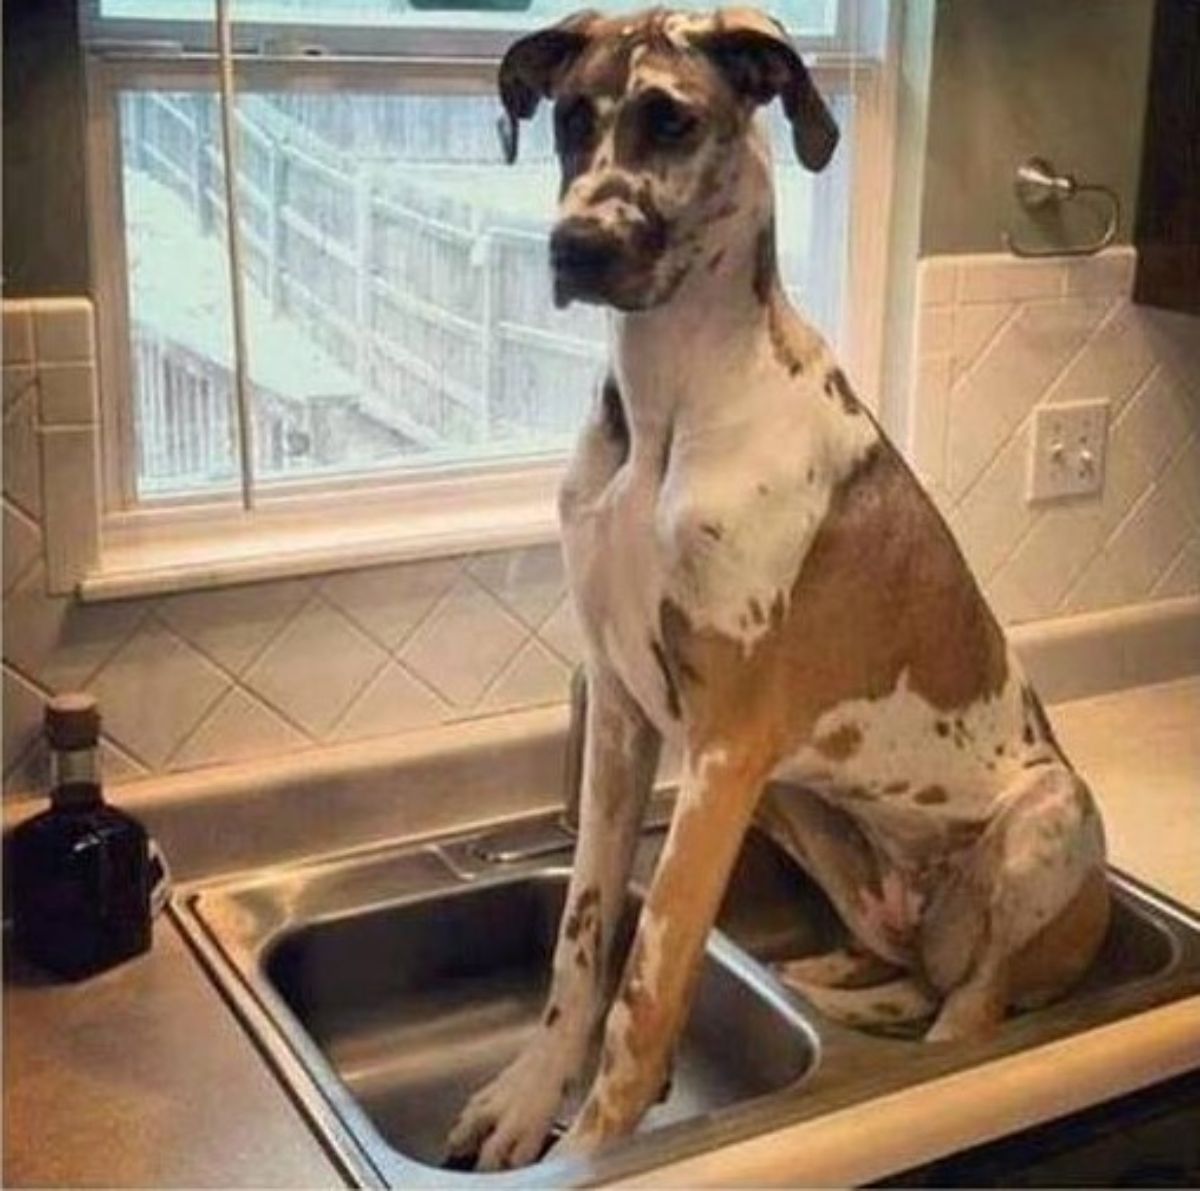 brown and white great dane sitting in 2 kitchen sinks